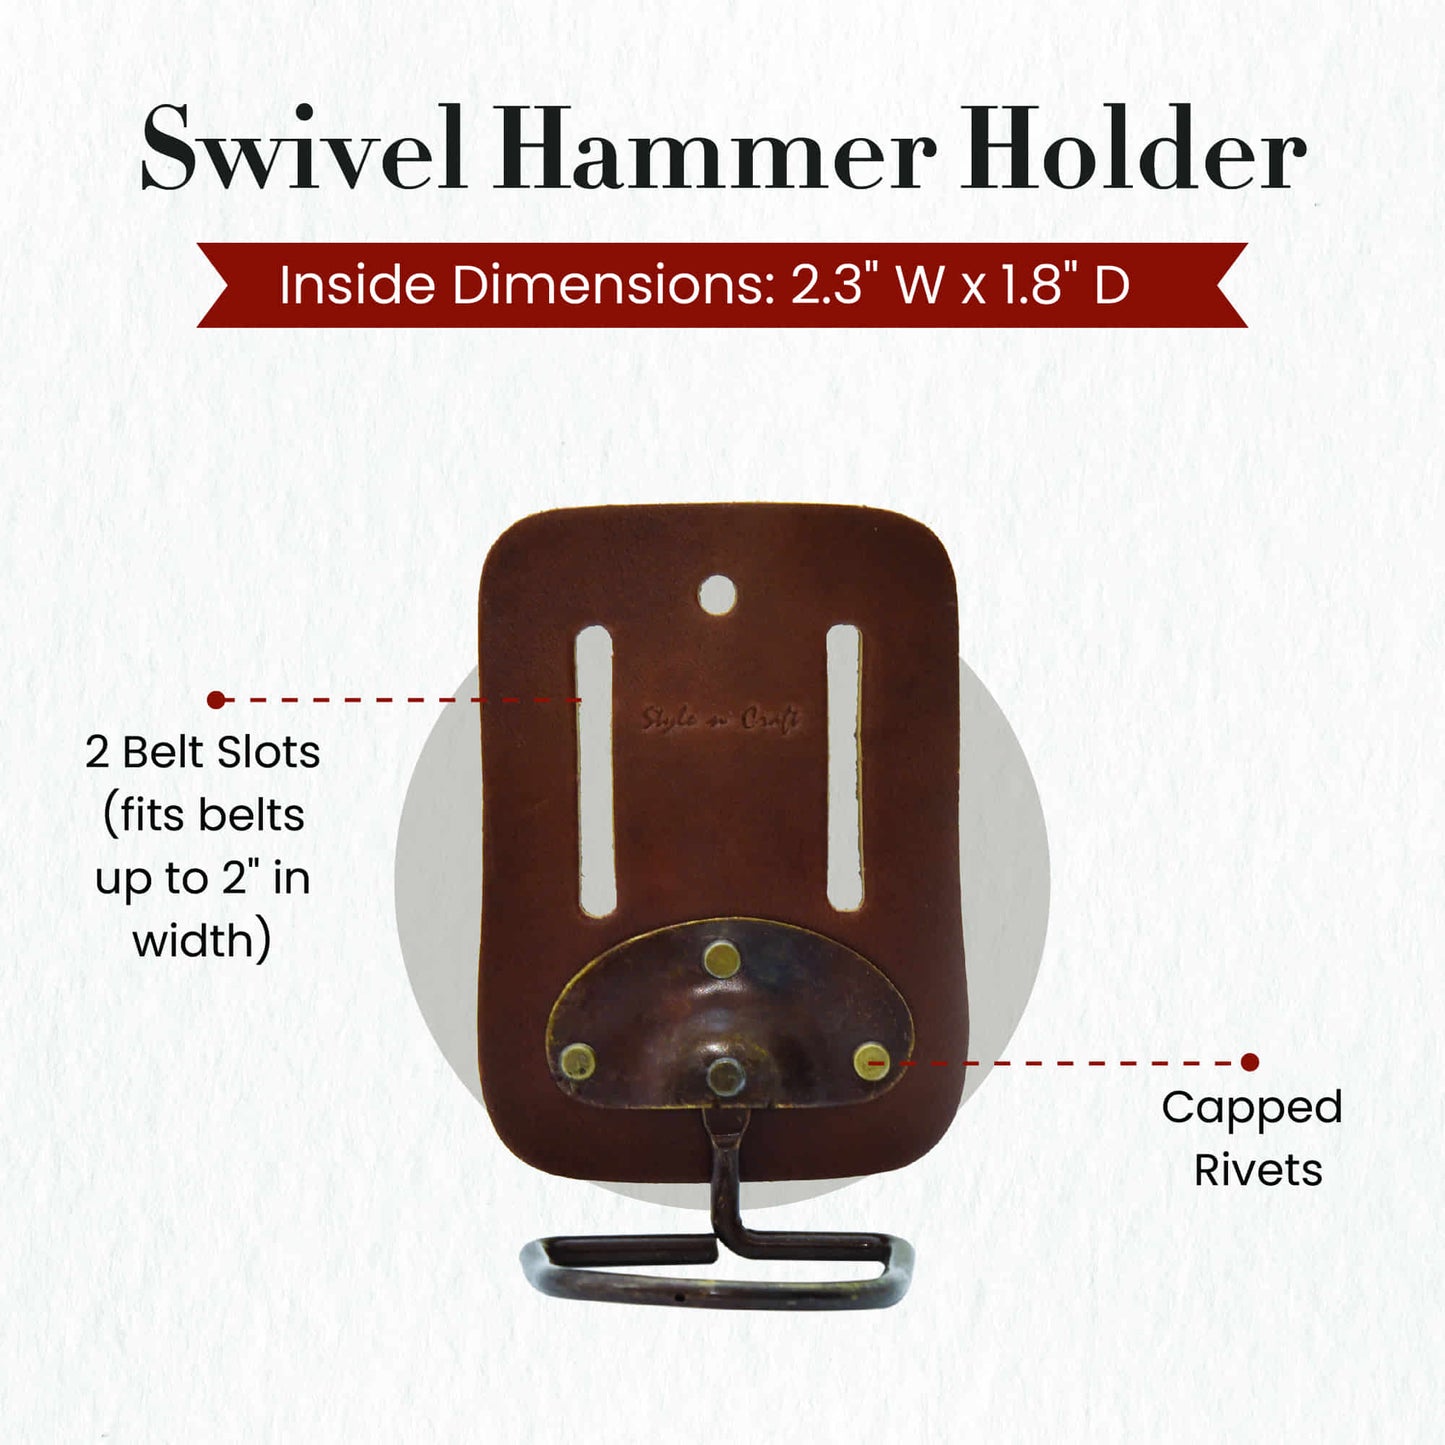 Style n Craft 98007 - Swivel Hammer Holder in Heavy Full Grain Leather in Dark Tan Color - Front view showing the details